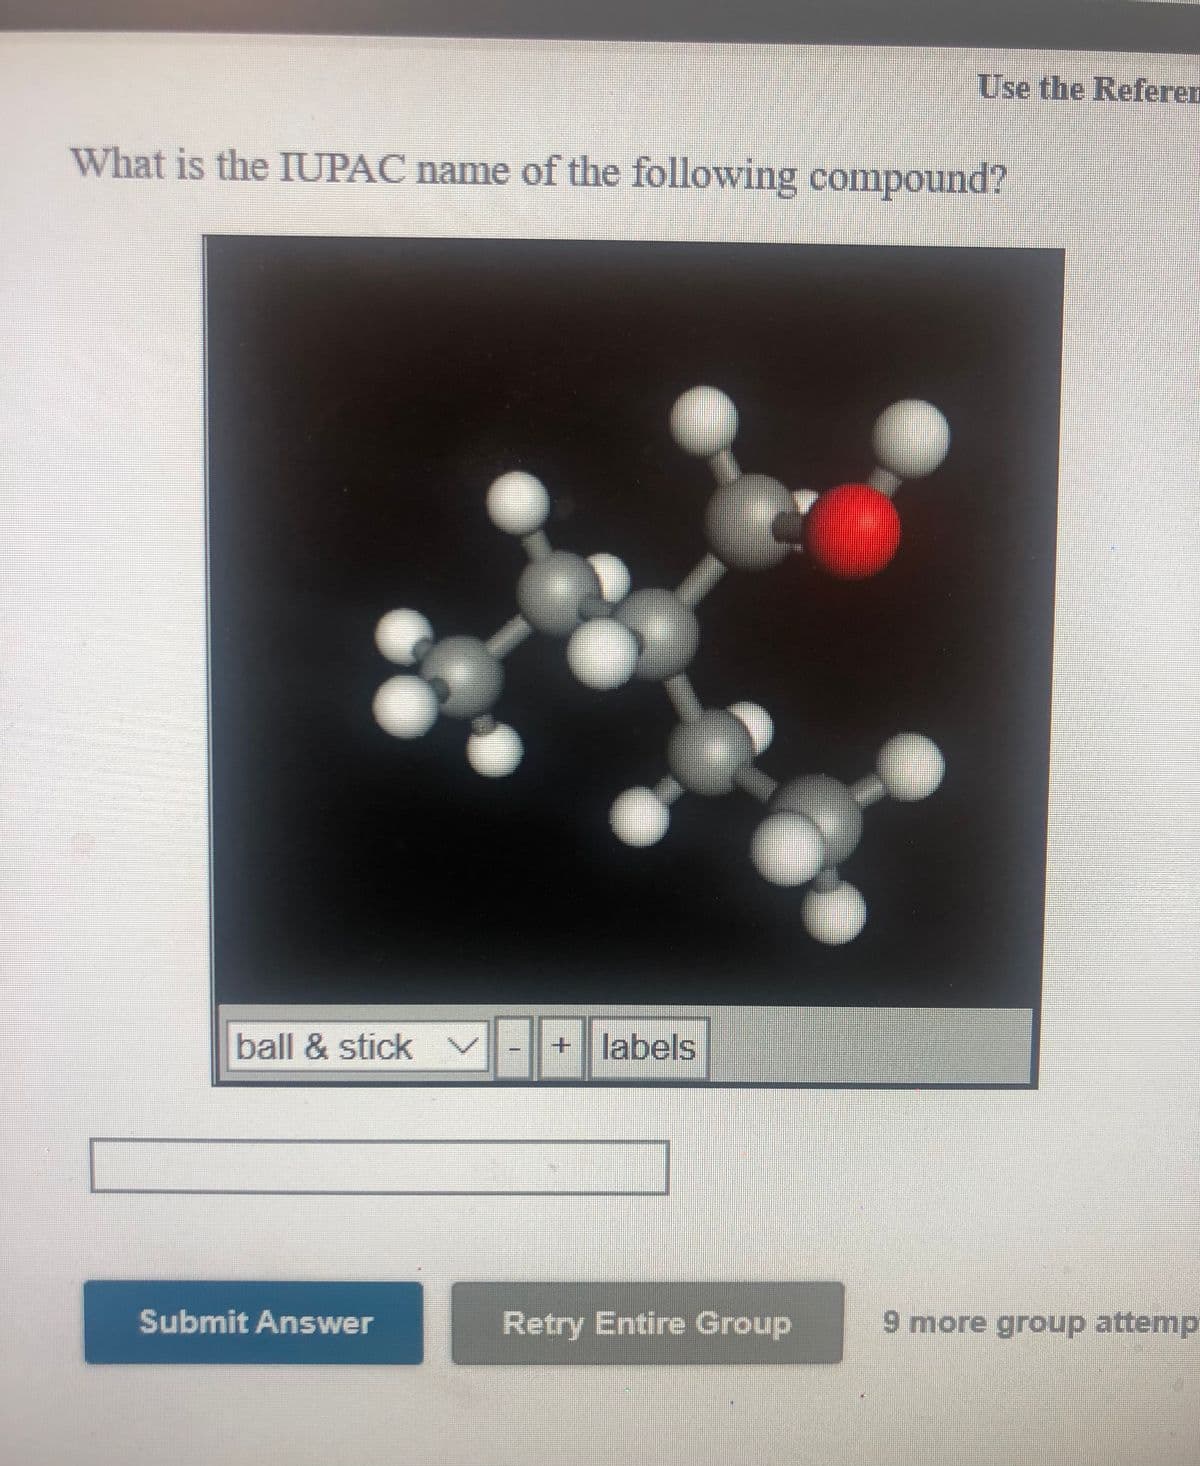 Use the Referen
What is the IUPAC name of the following compound?
ball & stick
+ labels
Submit Answer
Retry Entire Group
9 more group attemp
